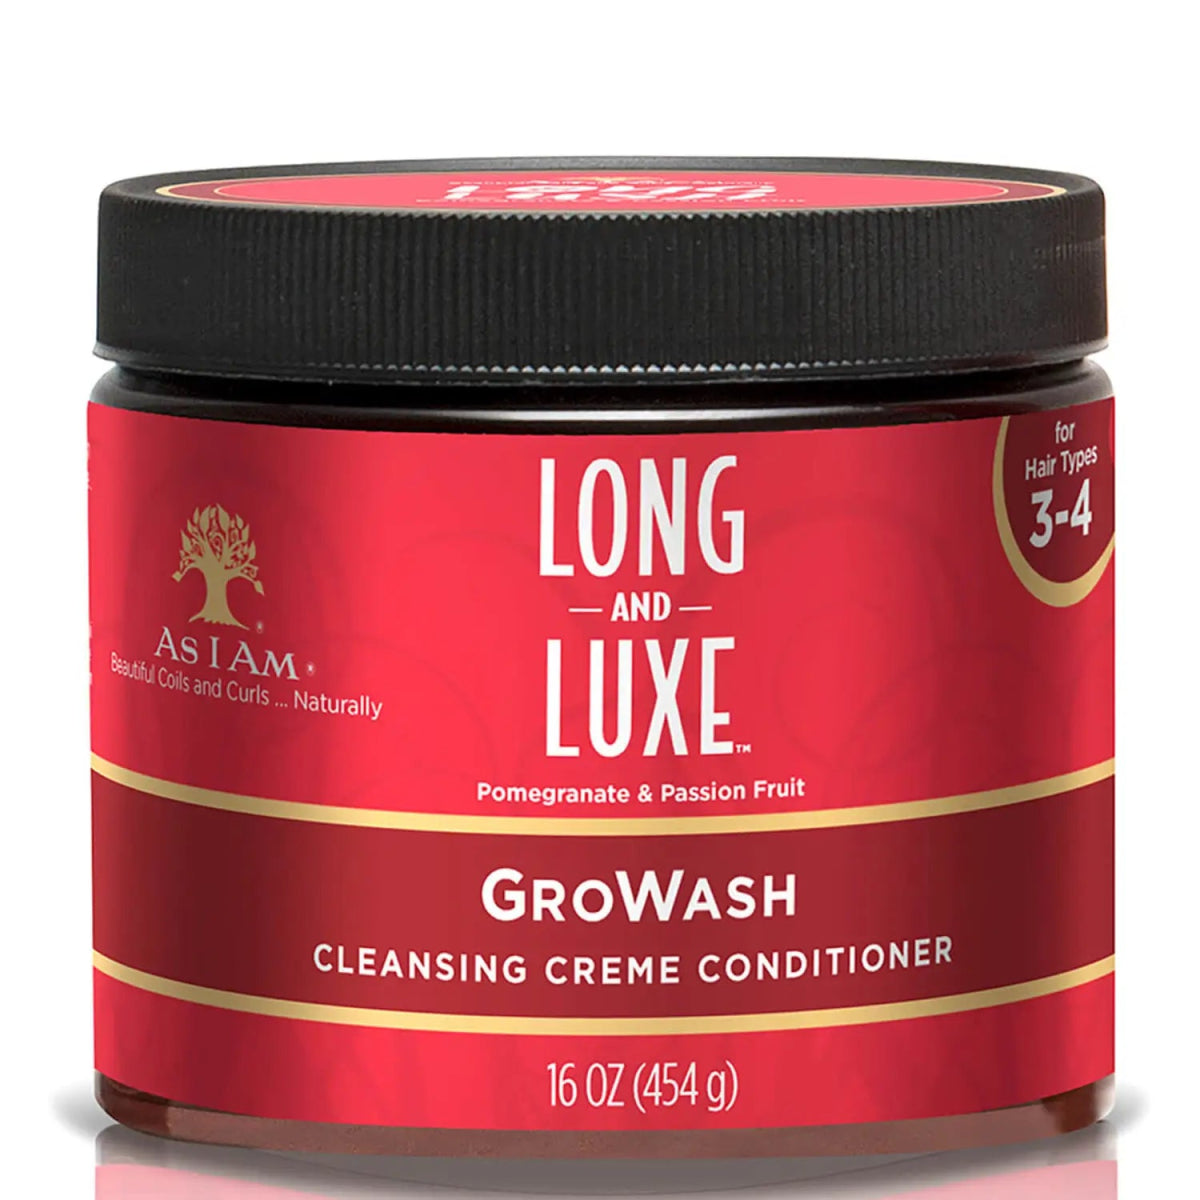 As I Am Long and Luxe Gro Wash Conditioner - Southwestsix Cosmetics As I Am Long and Luxe Gro Wash Conditioner Conditioner As I Am Southwestsix Cosmetics As I Am Long and Luxe Gro Wash Conditioner